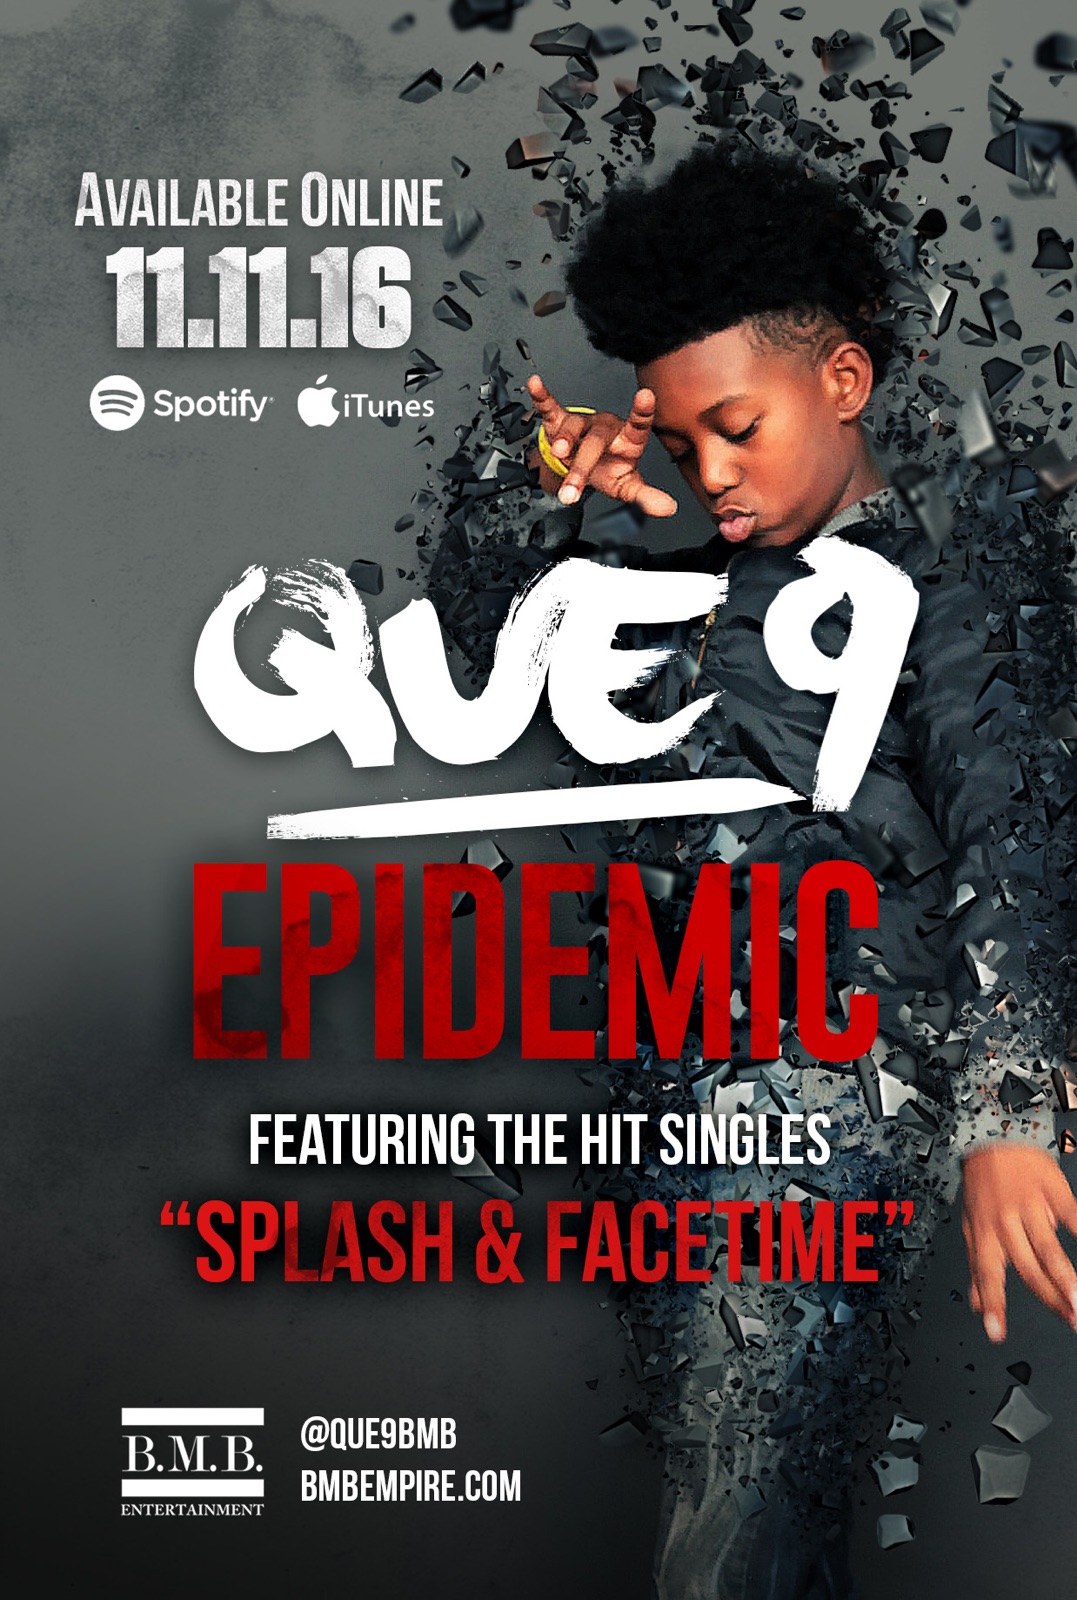 Que's "Epidemic" Online Everywhere!